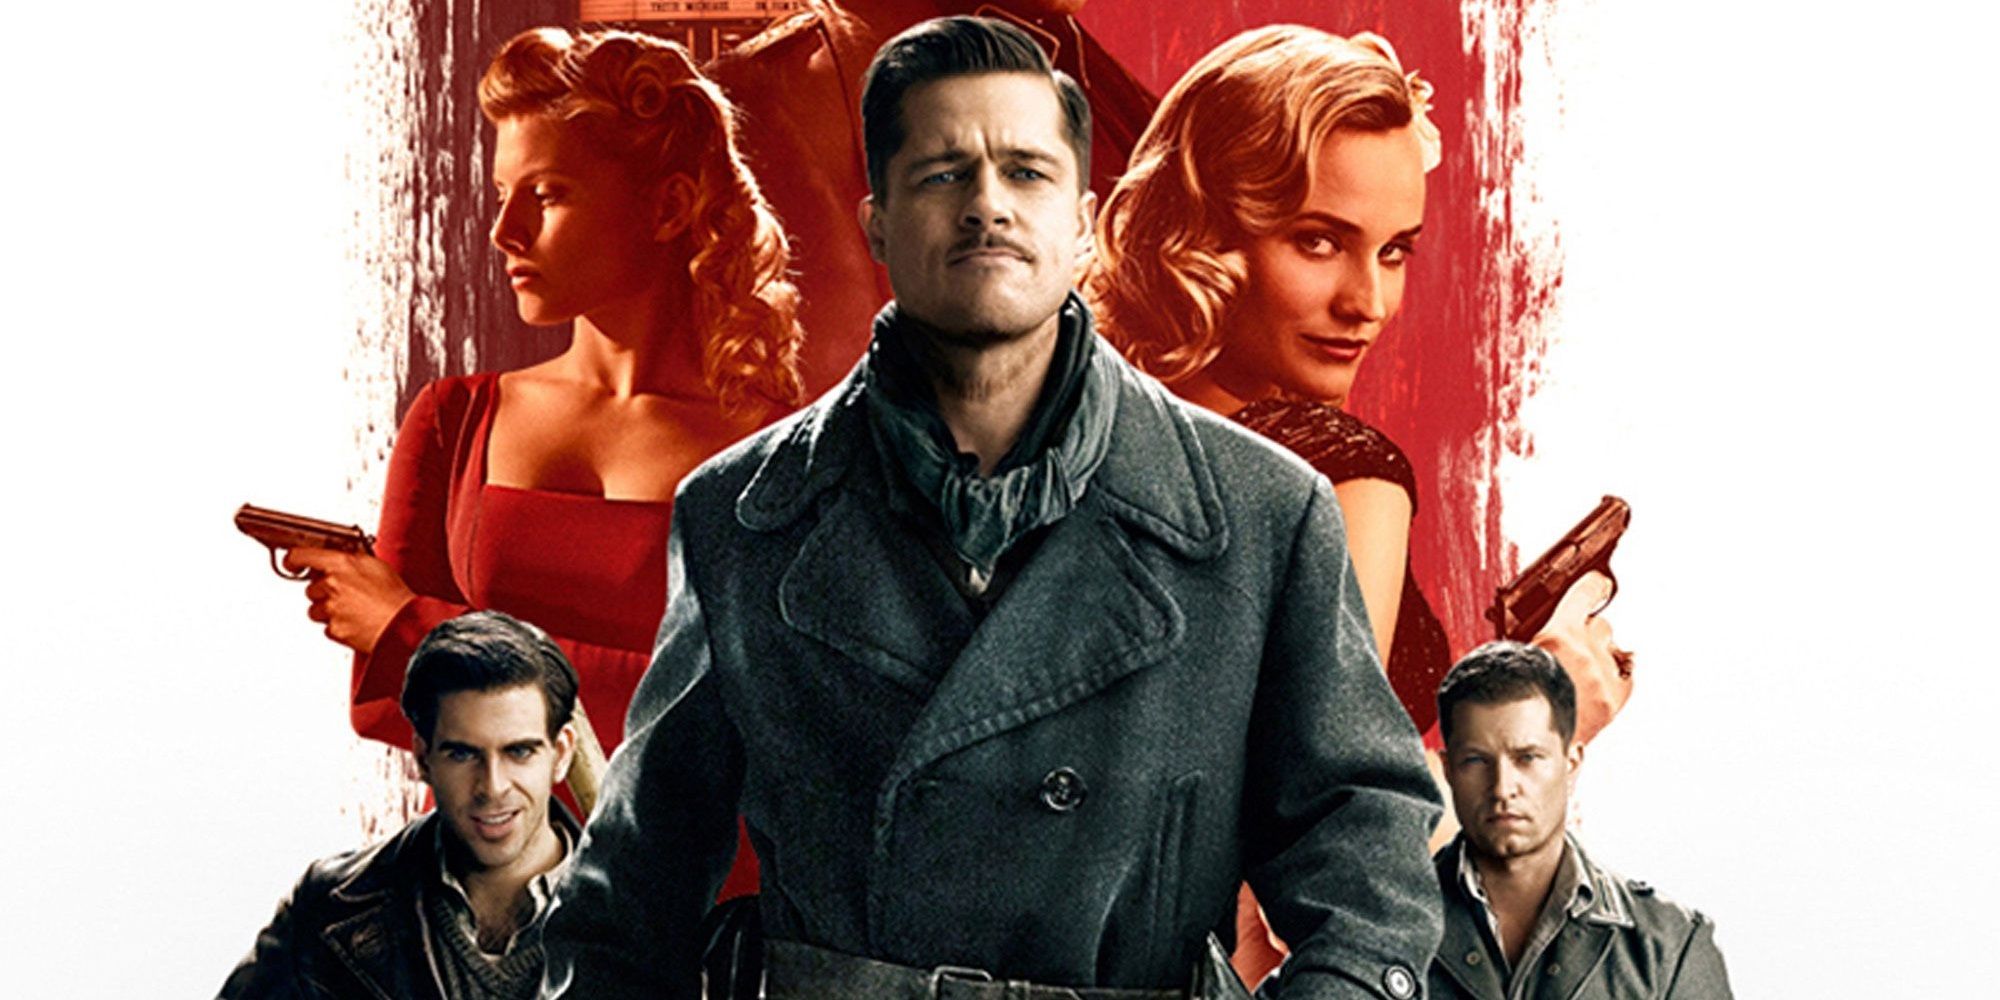 The poster for Inglourious Basterds